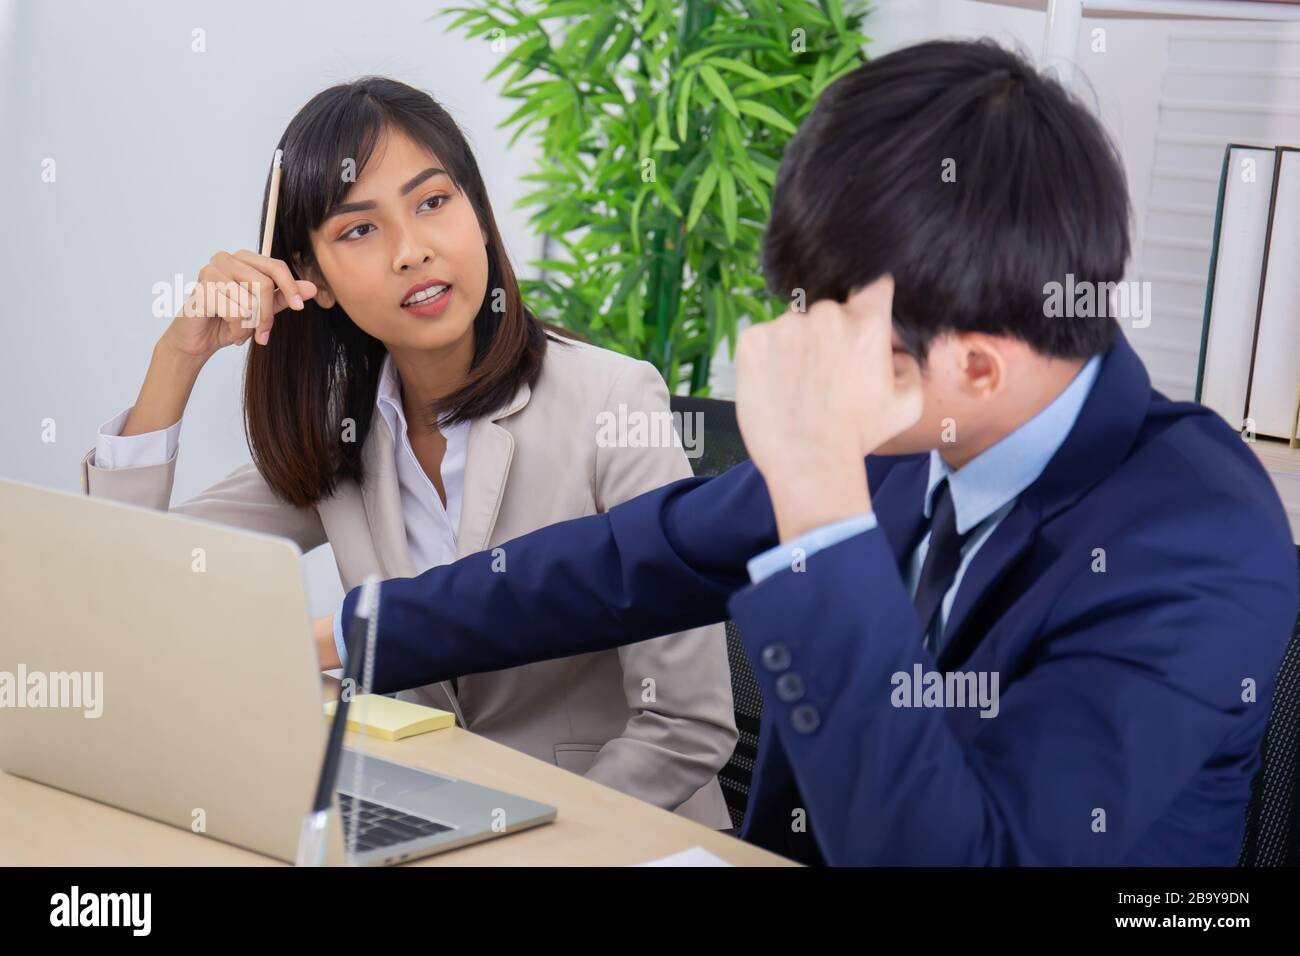 Two male and female staff Asians helped to plan a table full of documents and tablets, notebooks. Stock Photo